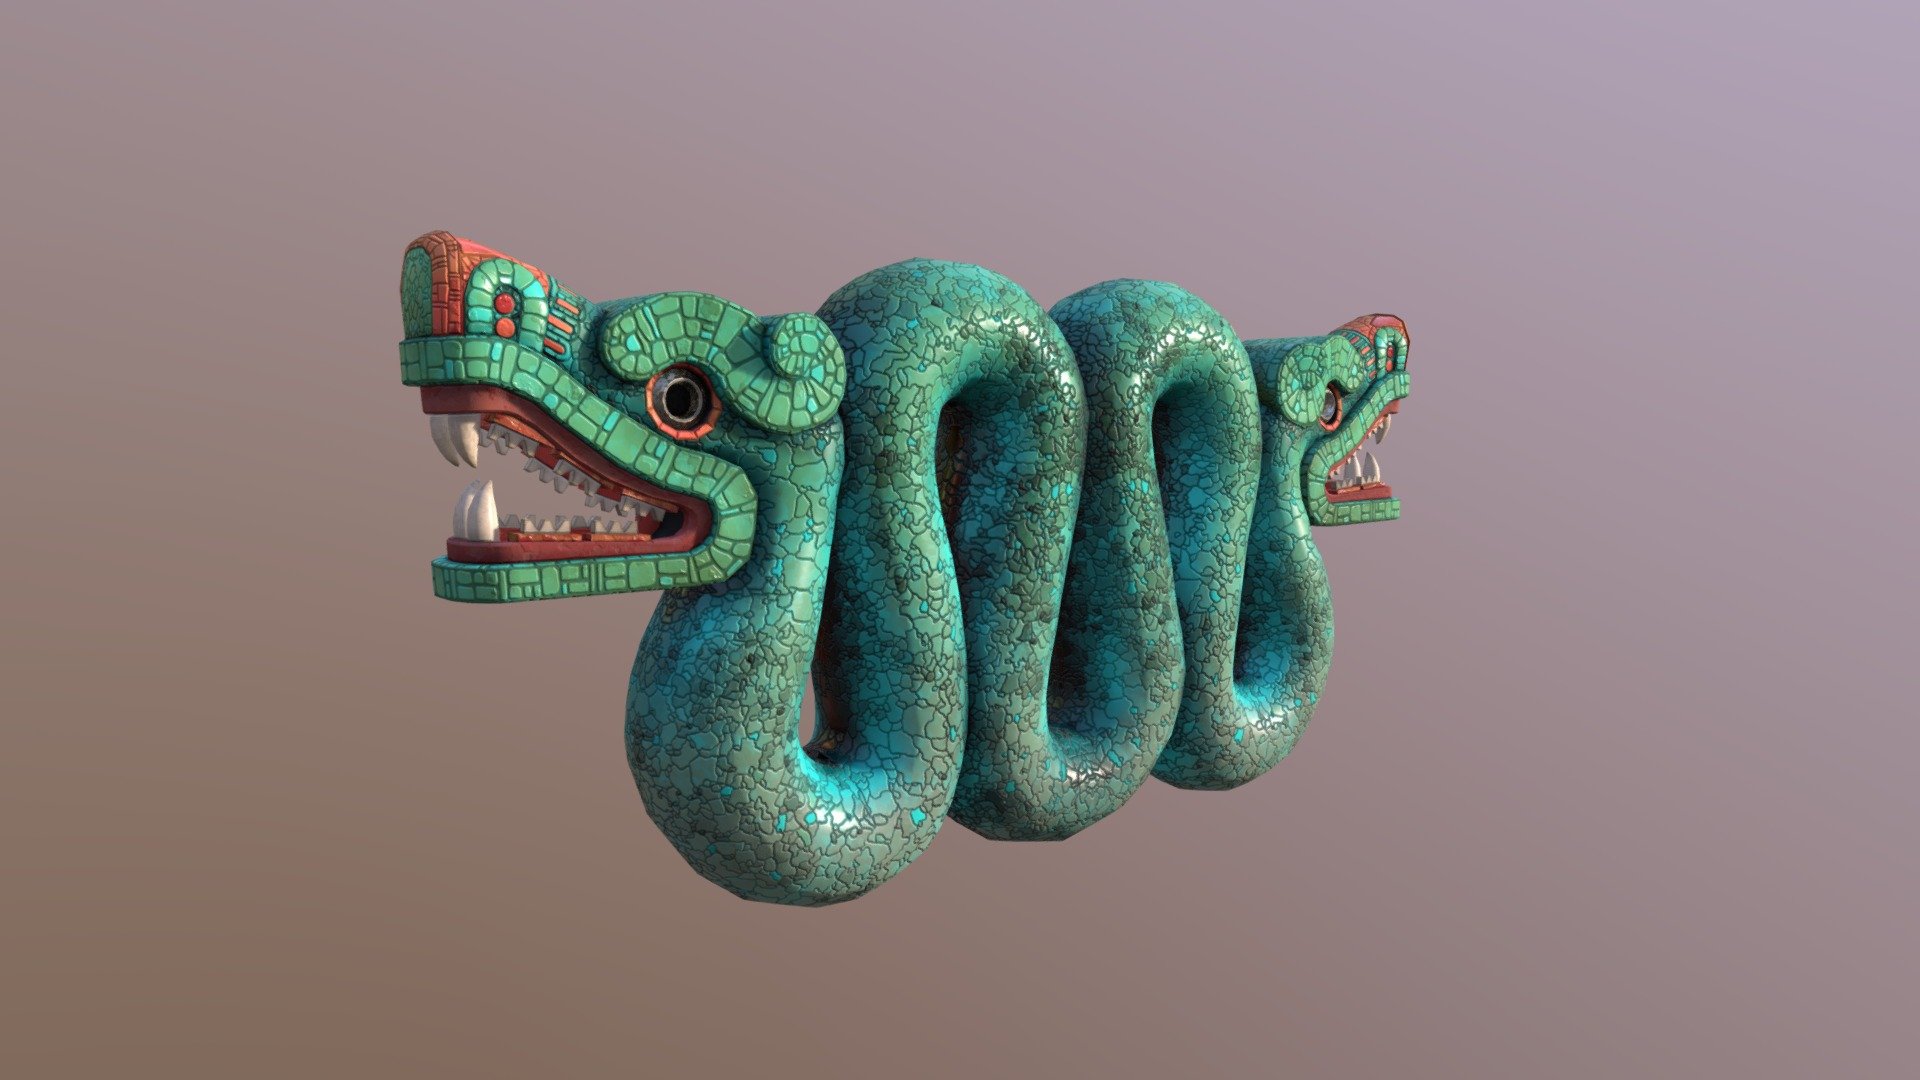 An ornate Aztec serpent representing Quetzalcoatl, a major diety in Aztec Culture. This would have been worn as a chestpiece mayhaps 3d model